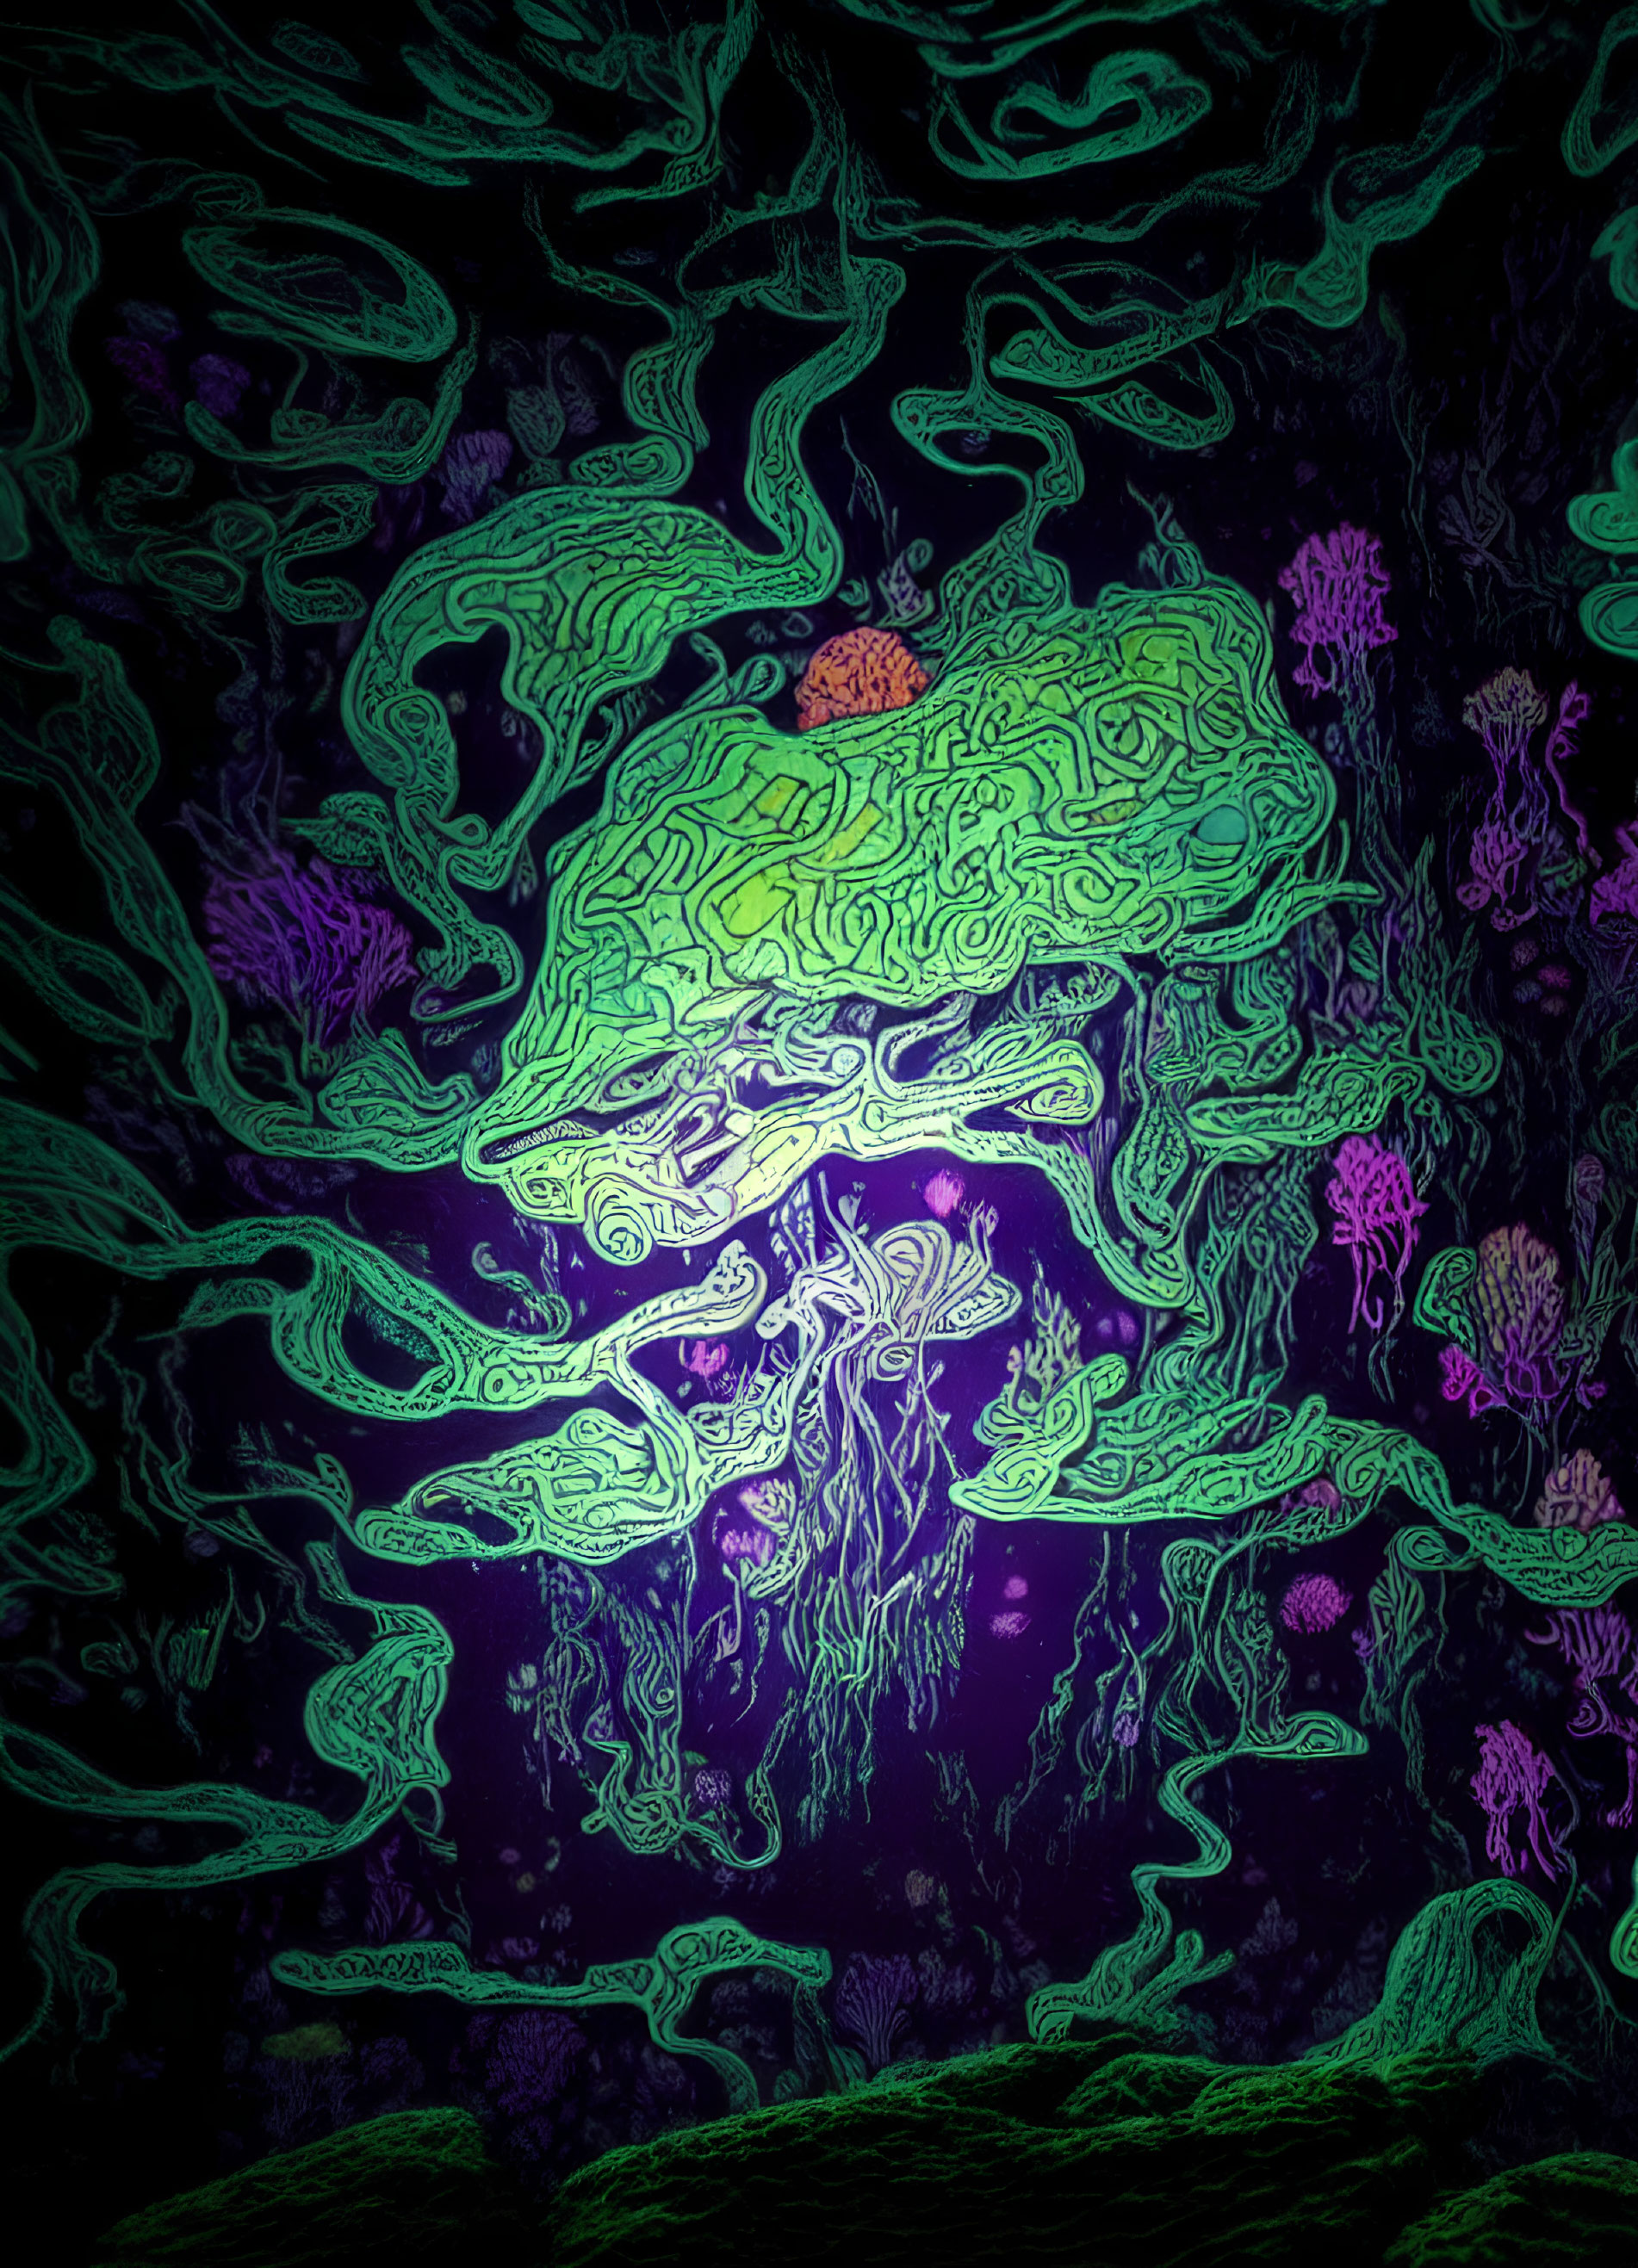 Vivid psychedelic underwater scene with neon coral patterns